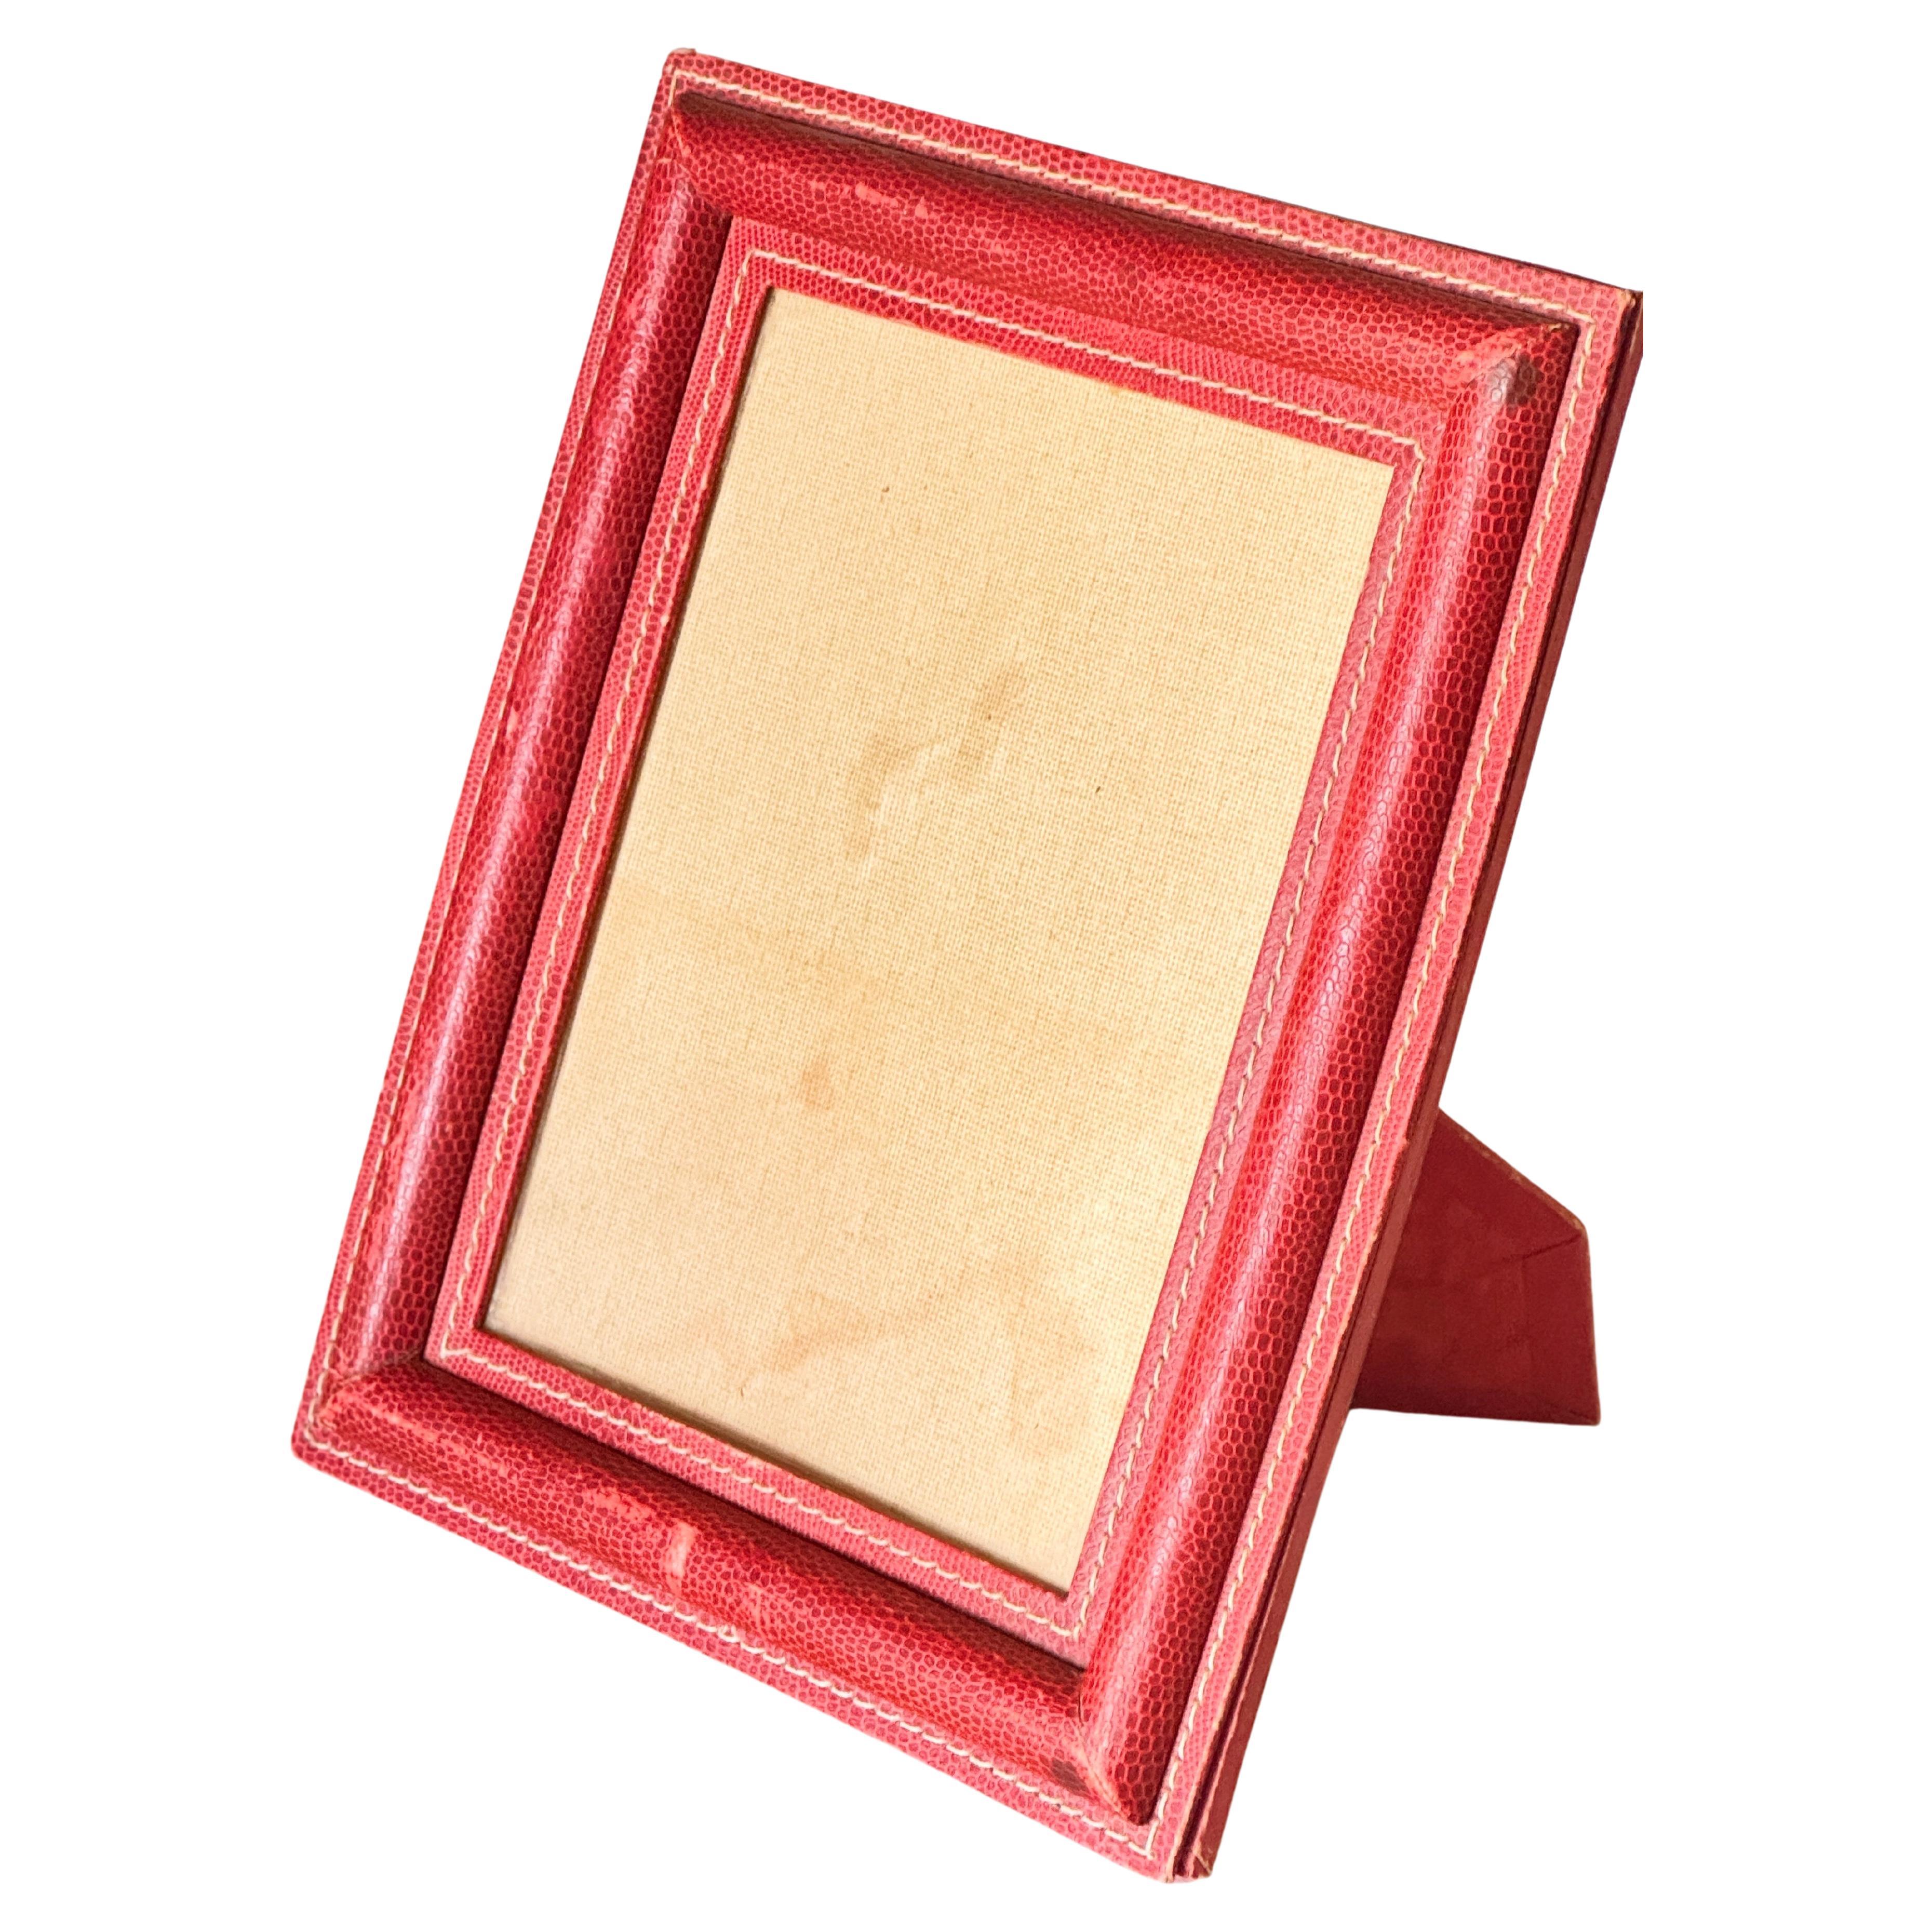 Jacques Adnet Style, Red Stitched Leather Picture Frame, France 1940 For Sale